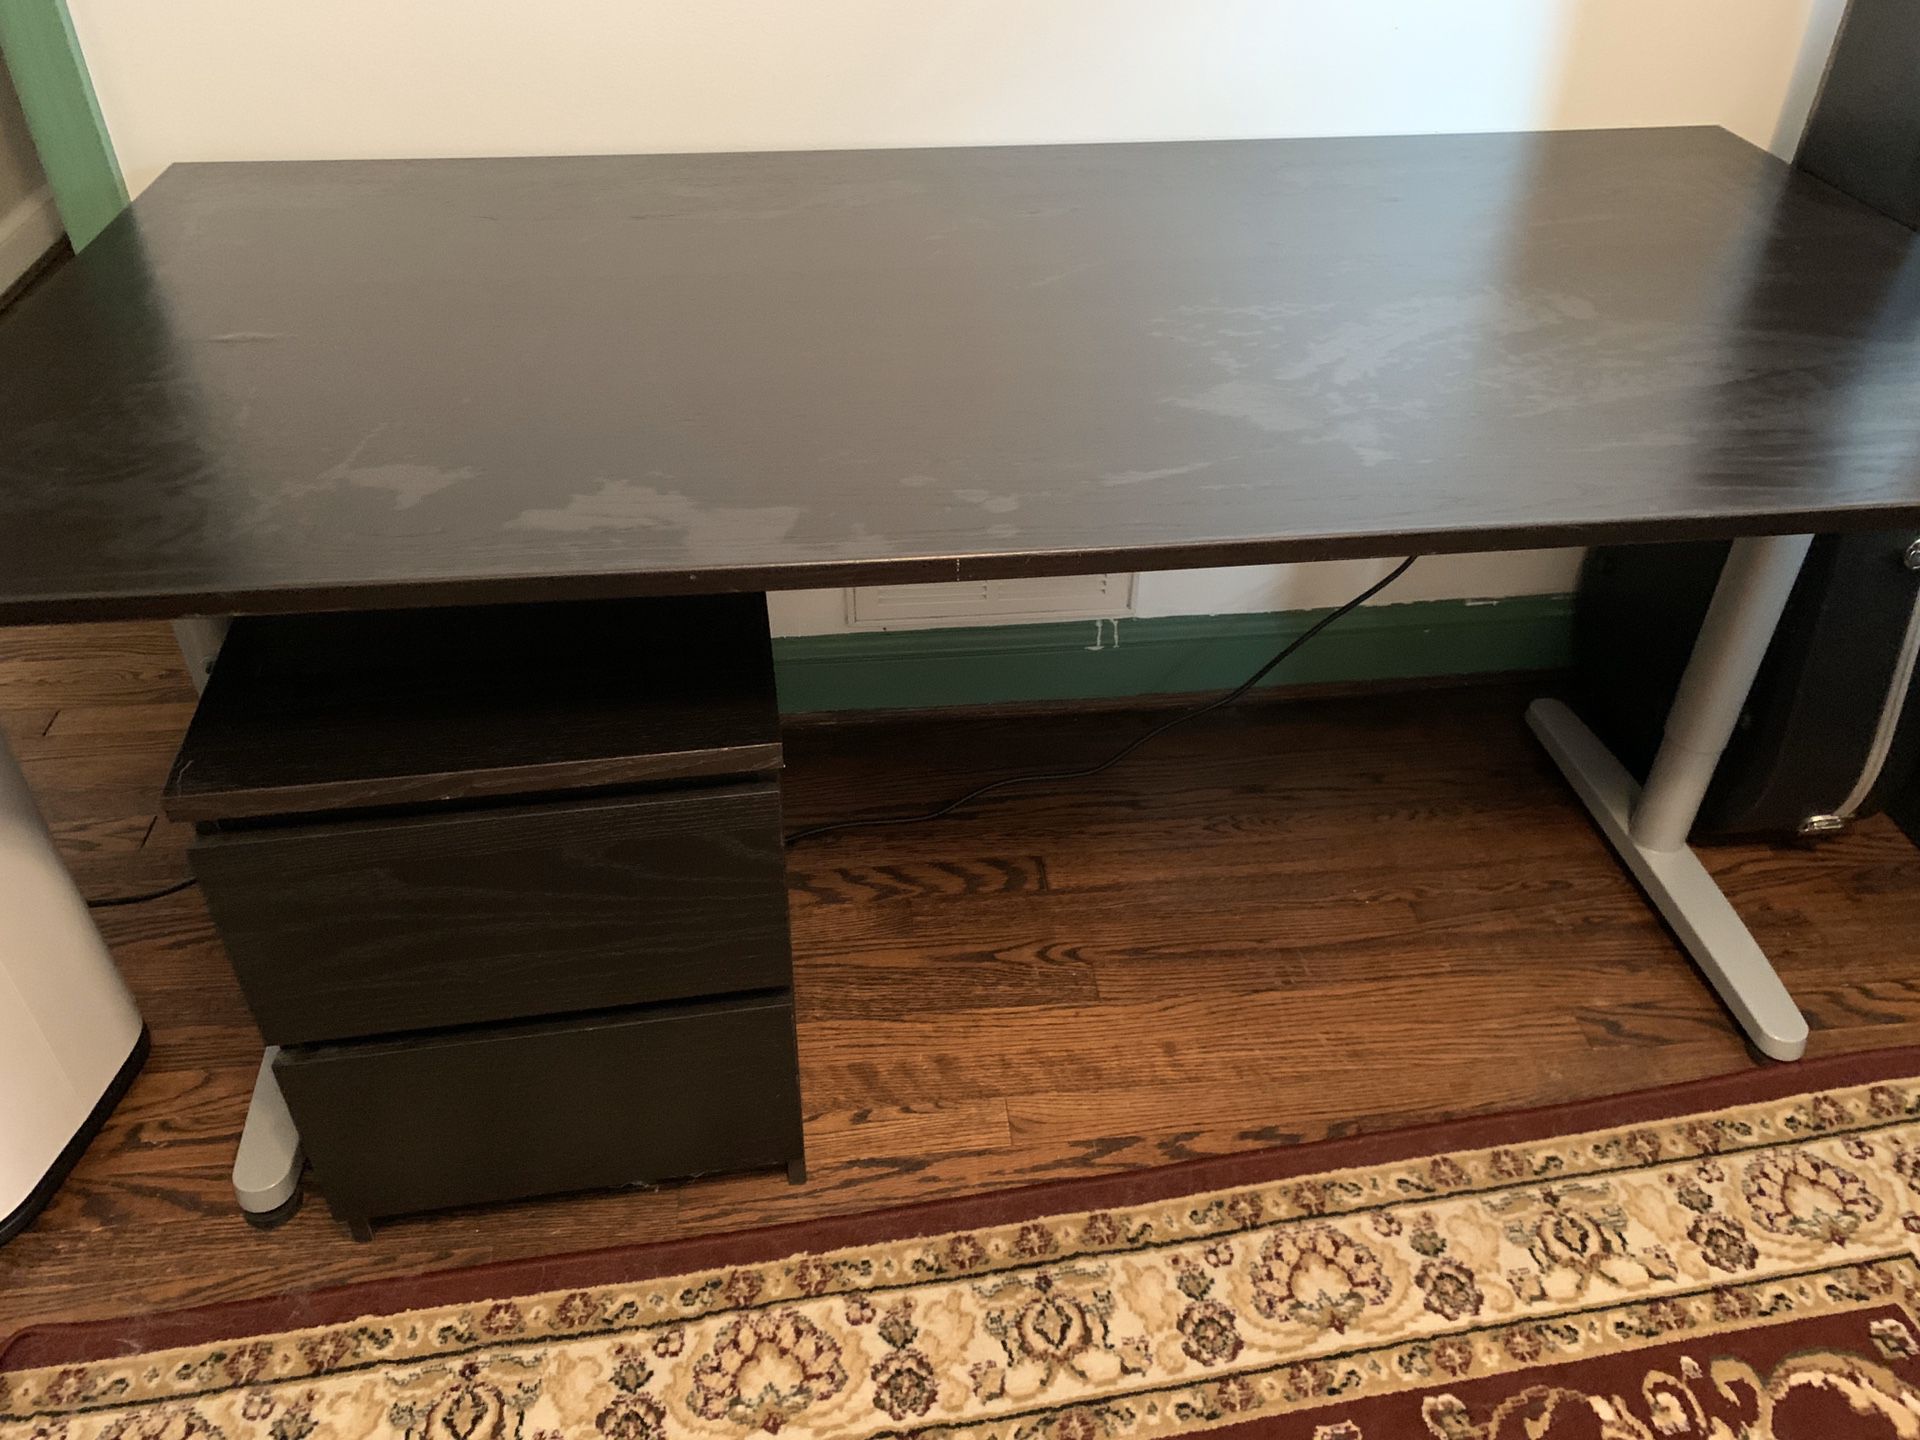 Galant IKEA Desk and Drawers